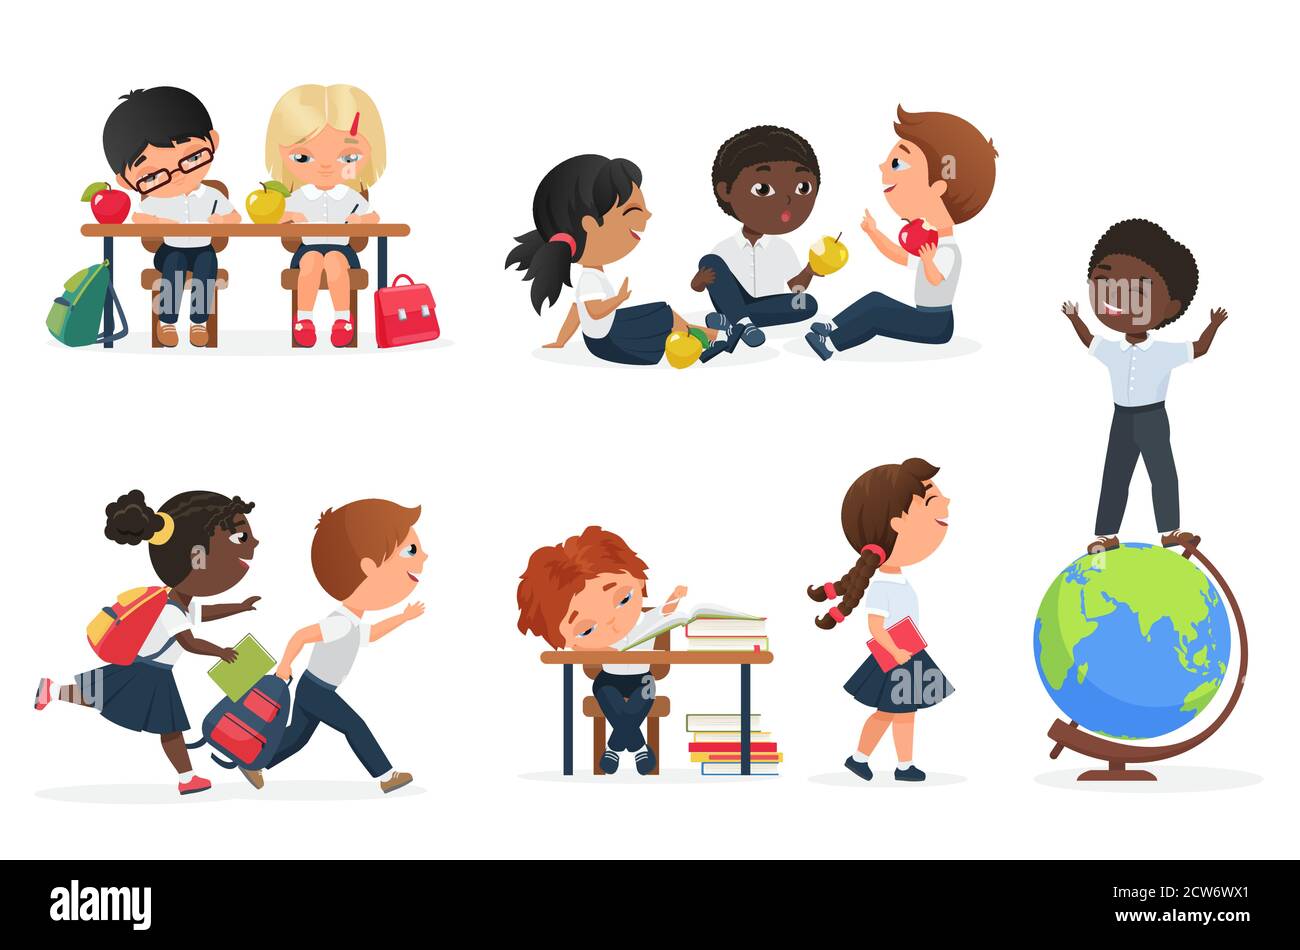 Kids in school vector illustration set. Cartoon flat schooling education collection with happy friends children characters study, read books, have fun together, child doing homework isolated on white Stock Vector